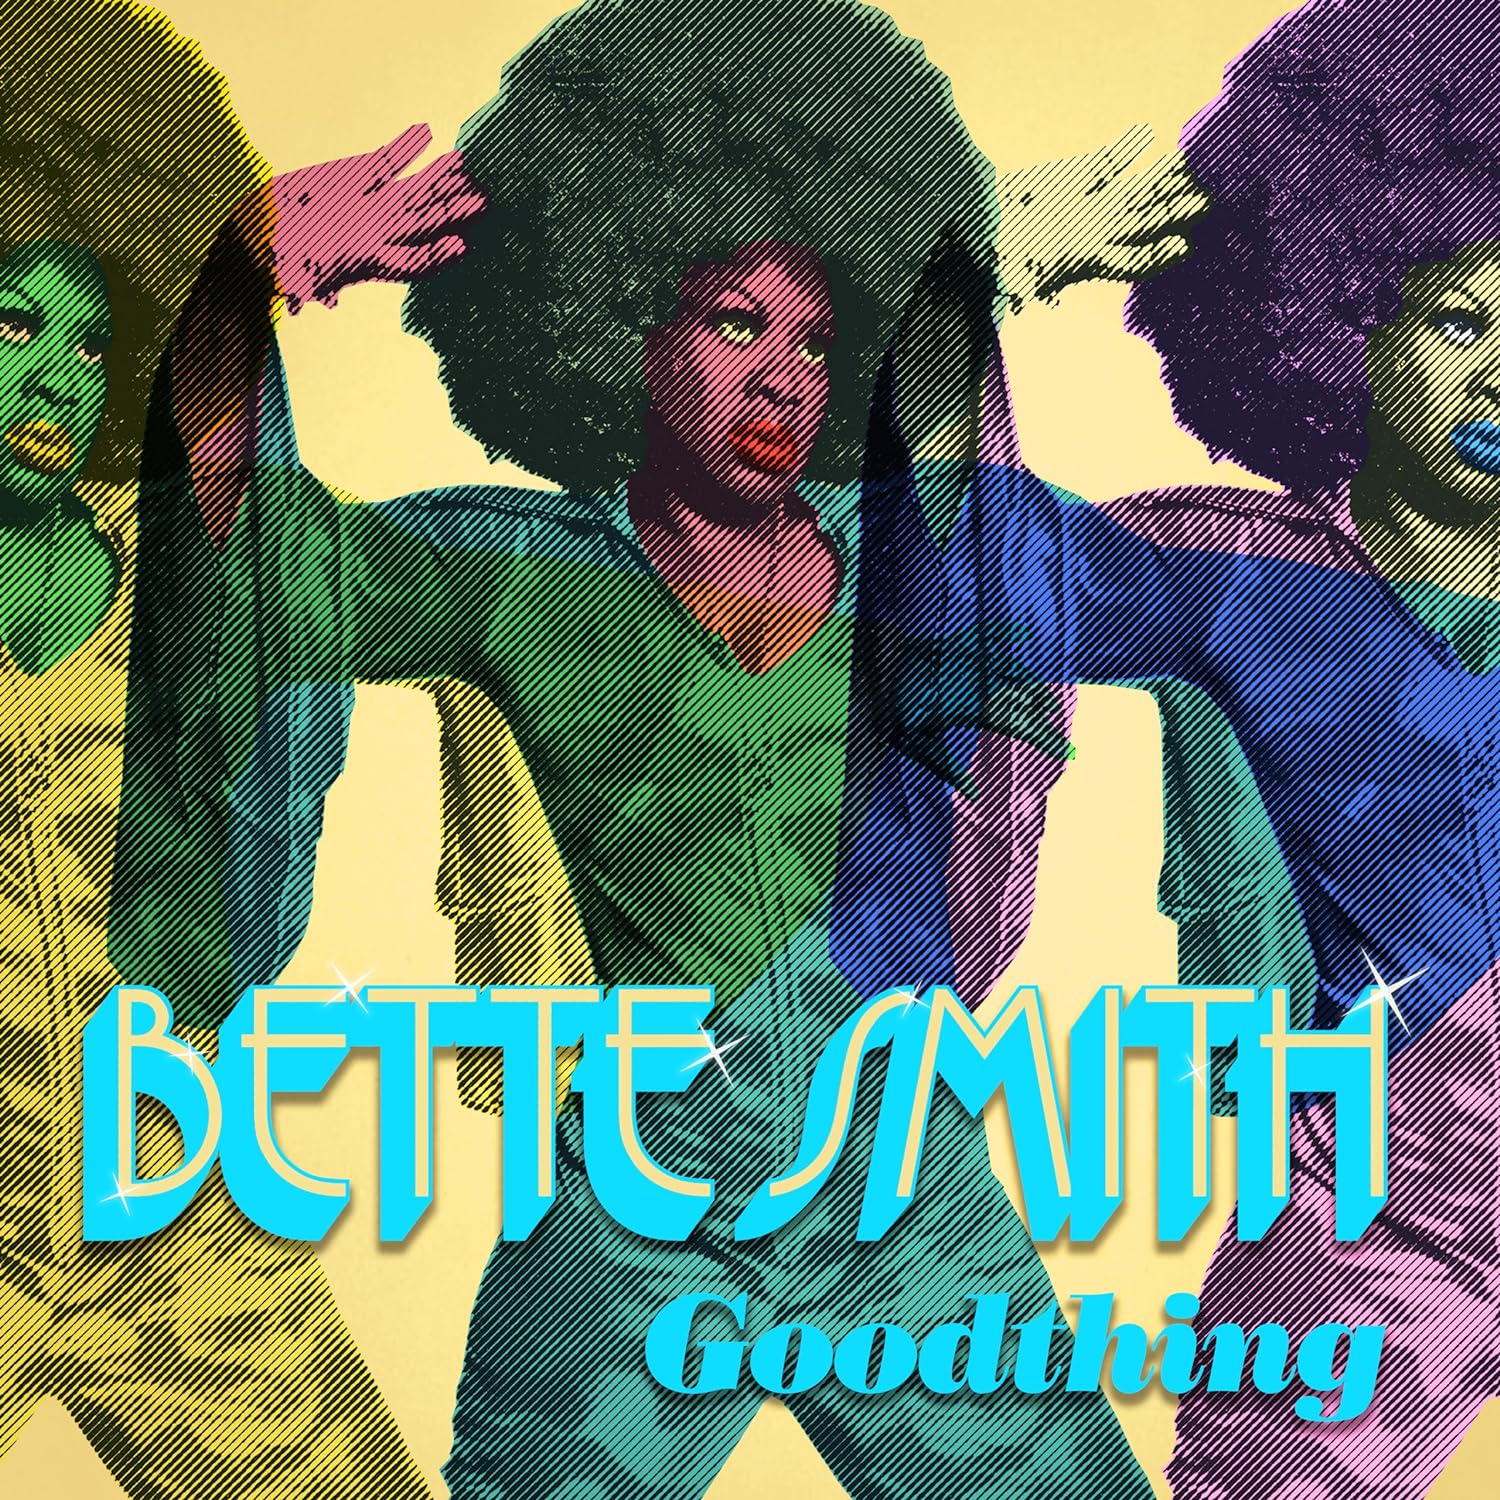 BETTE SMITH - Goodthing - LP - Gold Vinyl [MAY 3]